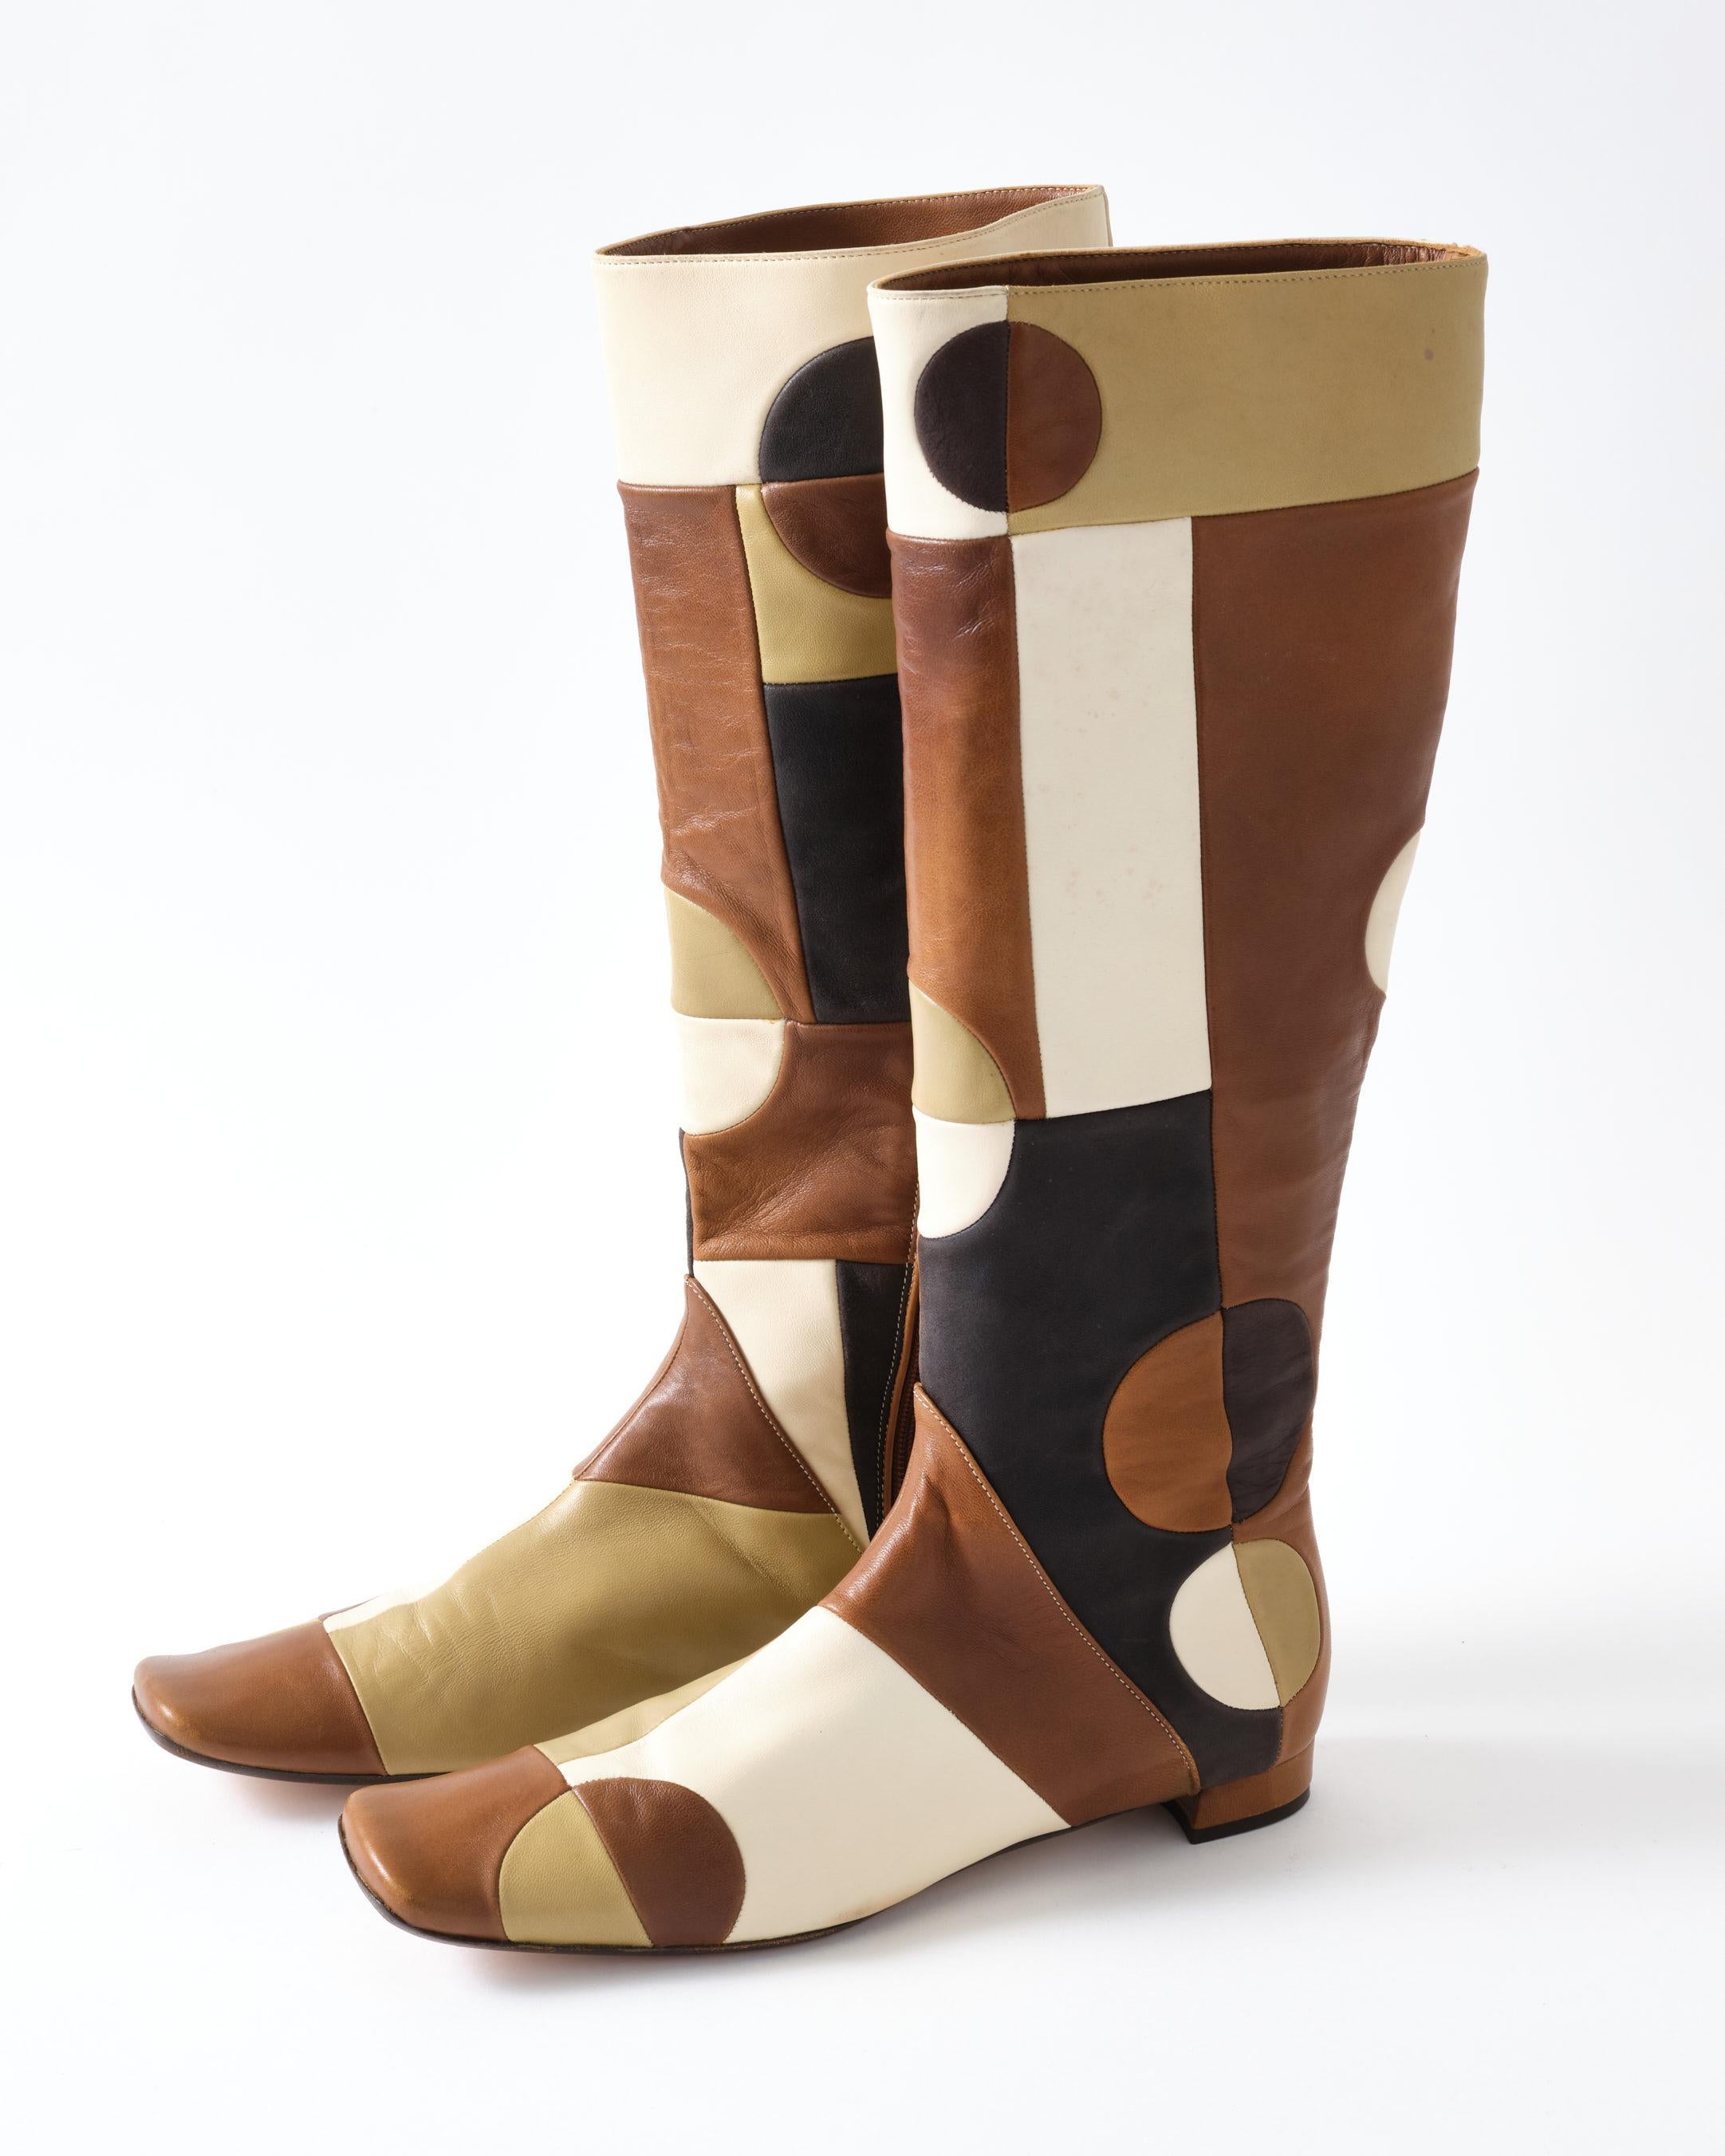 Marni Leather Boots, 1960's Style Design, Brown, Beige & Khaki, Pair of Boots For Sale 6